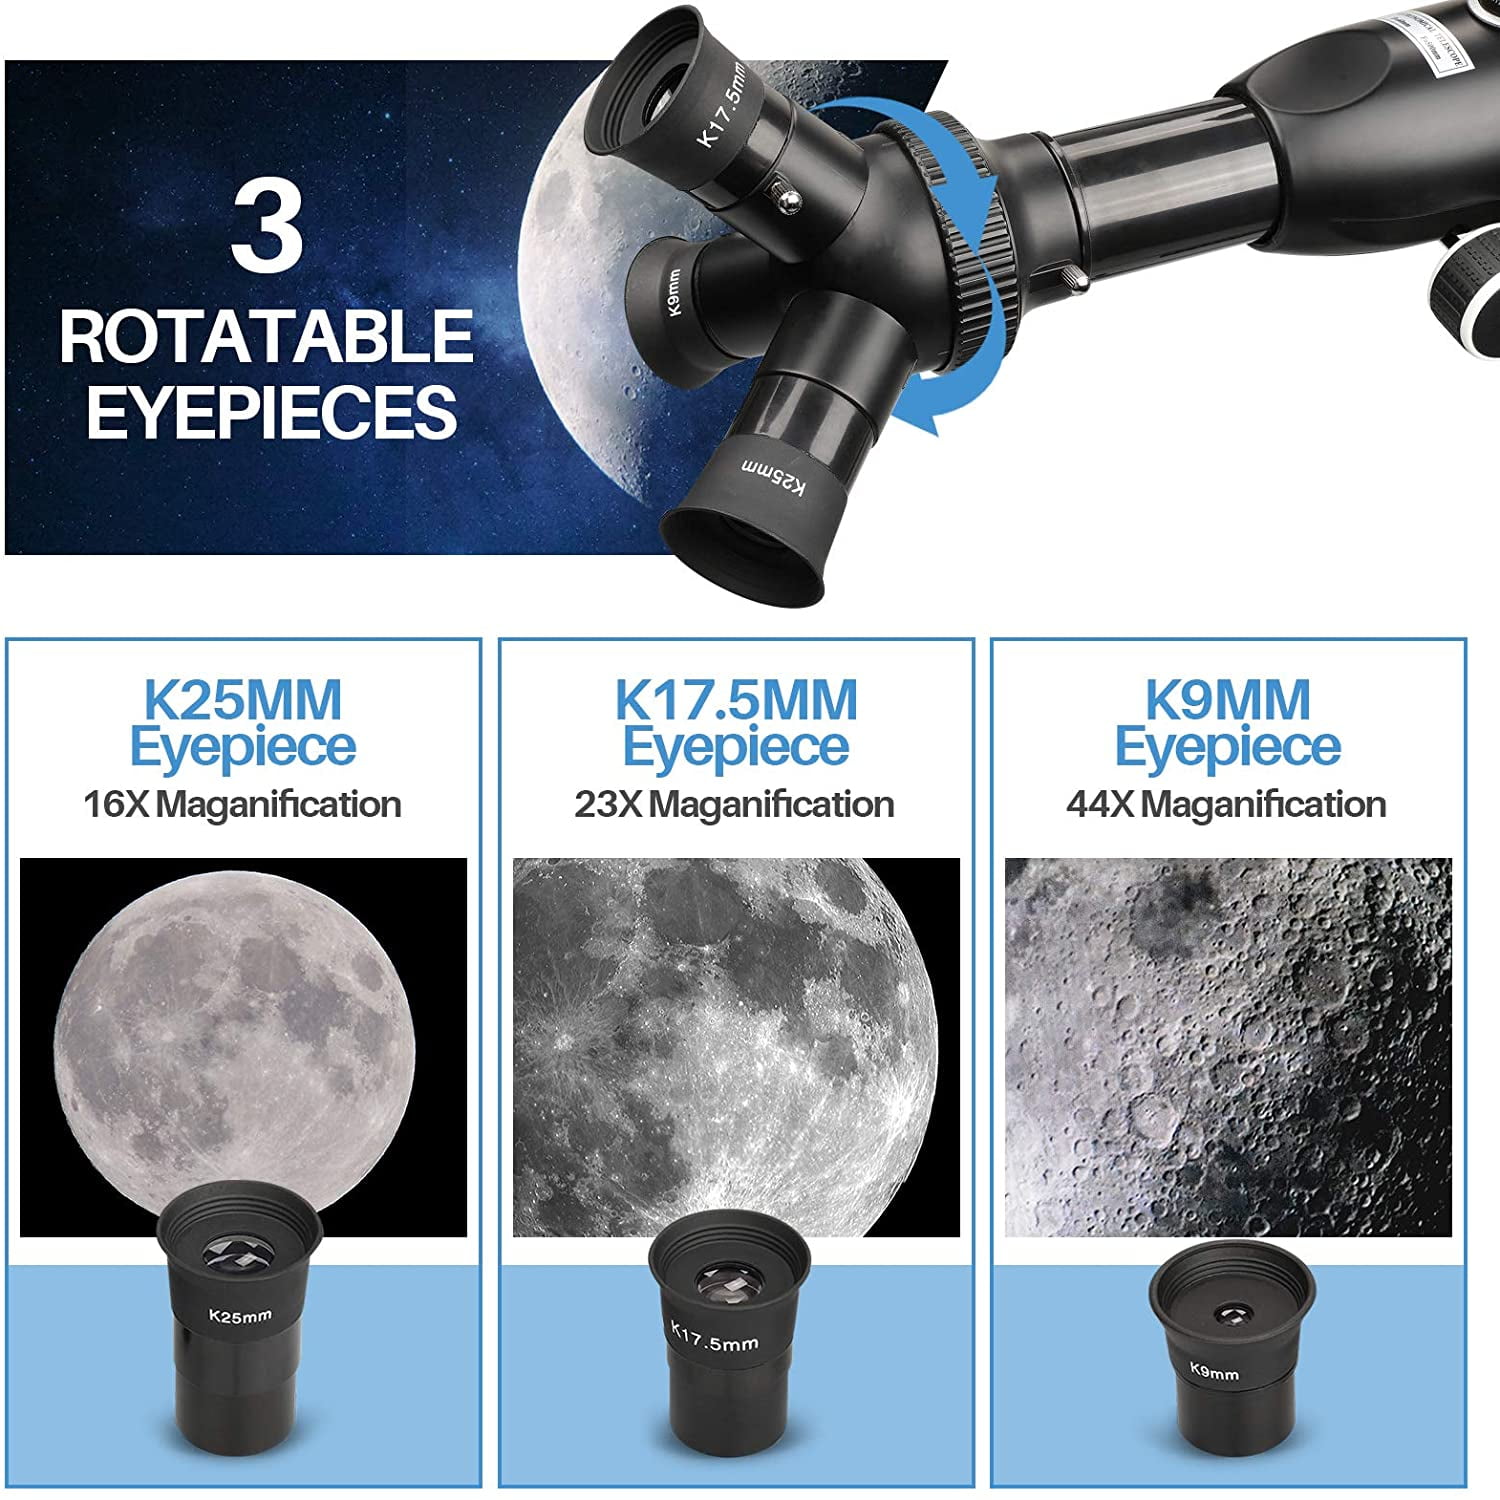 Telescope for Adults Kids Beginners,3 Rotatable Eyepieces 80mm Aperture 400mm Mount Astronomical Refracting Telescope HD high Magnification Portable and Equipped with Phone Photo Adapter 